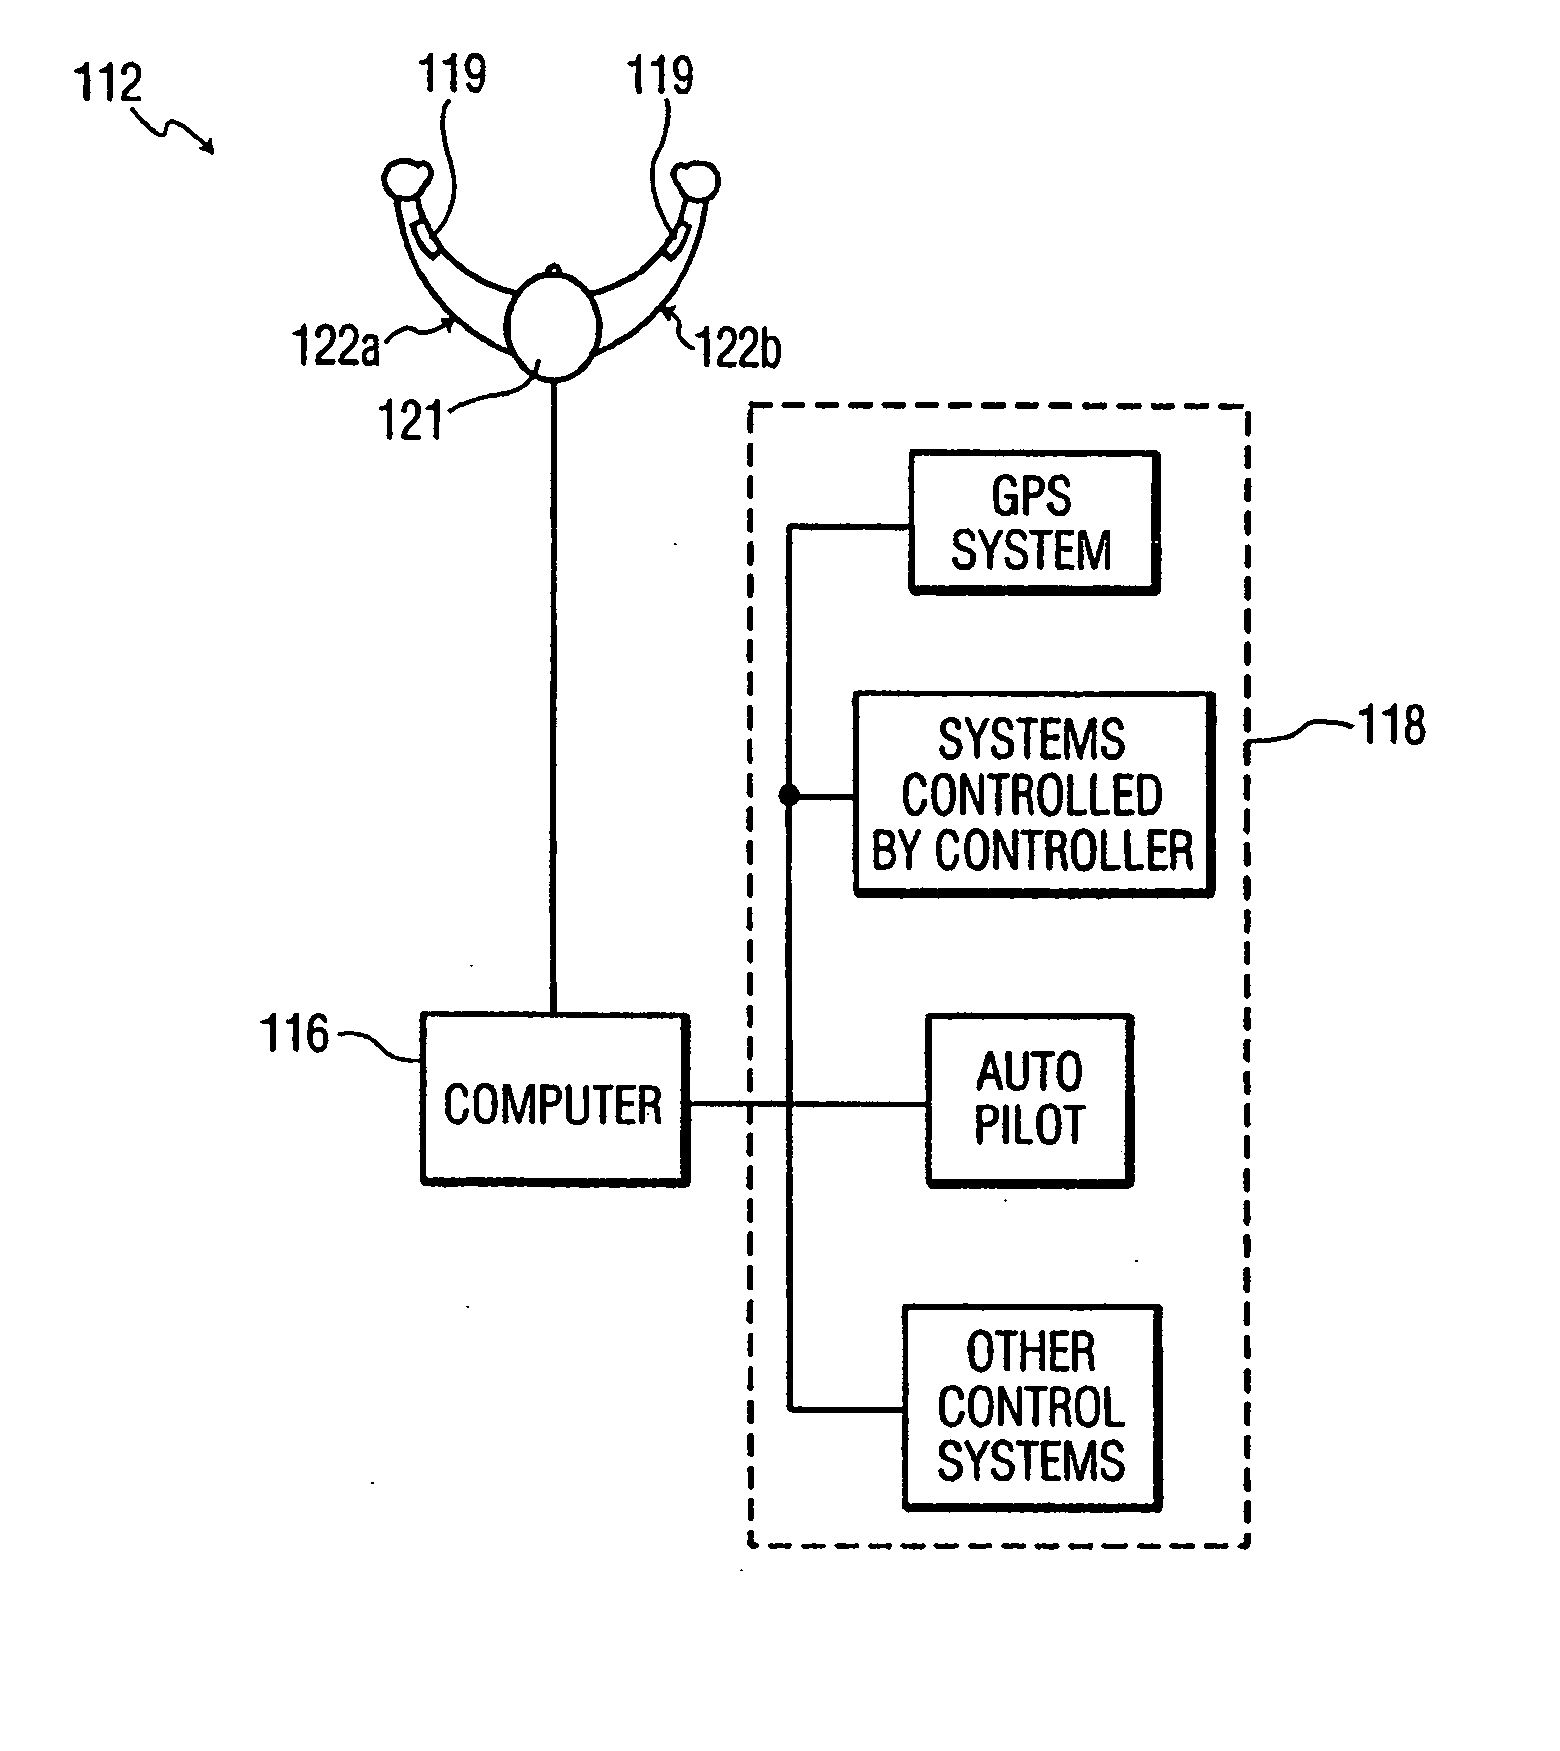 Apparatus, system and method for aircraft security and anti-hijacking intervention